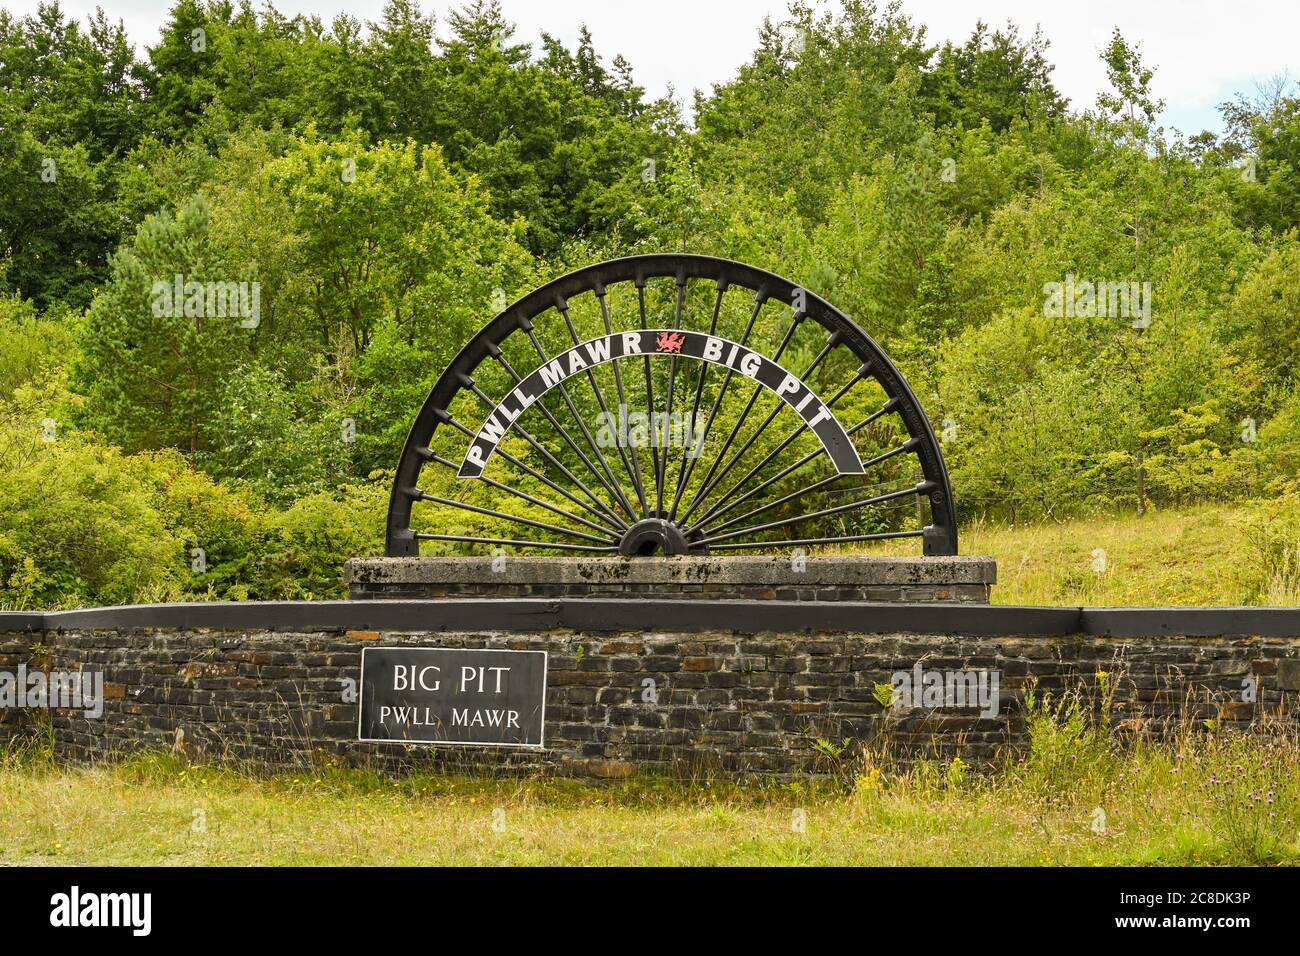 Blaenavon, Wales - July 2020: Old pit winding wheel at the entrance to the Big Pit museum in Blaenavon. It is a popular visitor attraction showing the Stock Photo